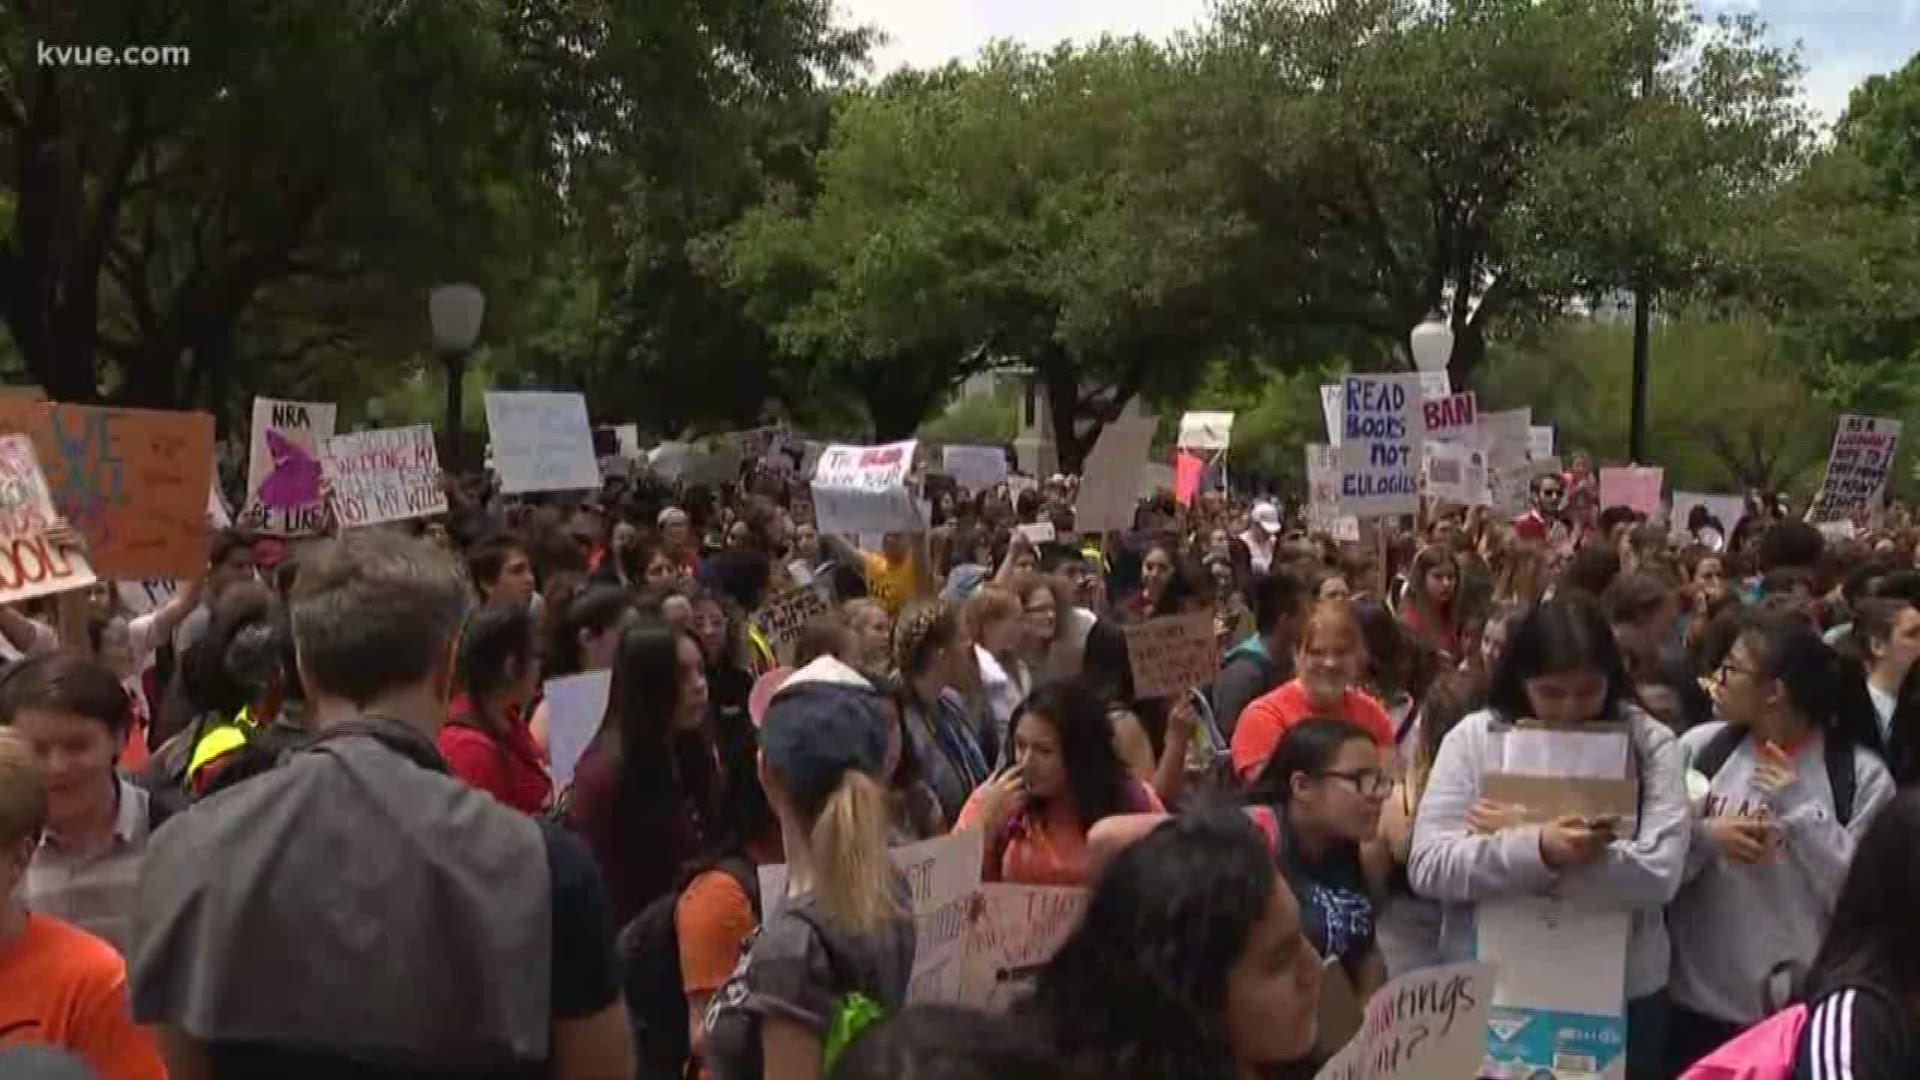 Hundreds of Austin-area students walked out of their school and made their way to the Texas State Capitol as part of National School Walkout Day Friday, April 20.